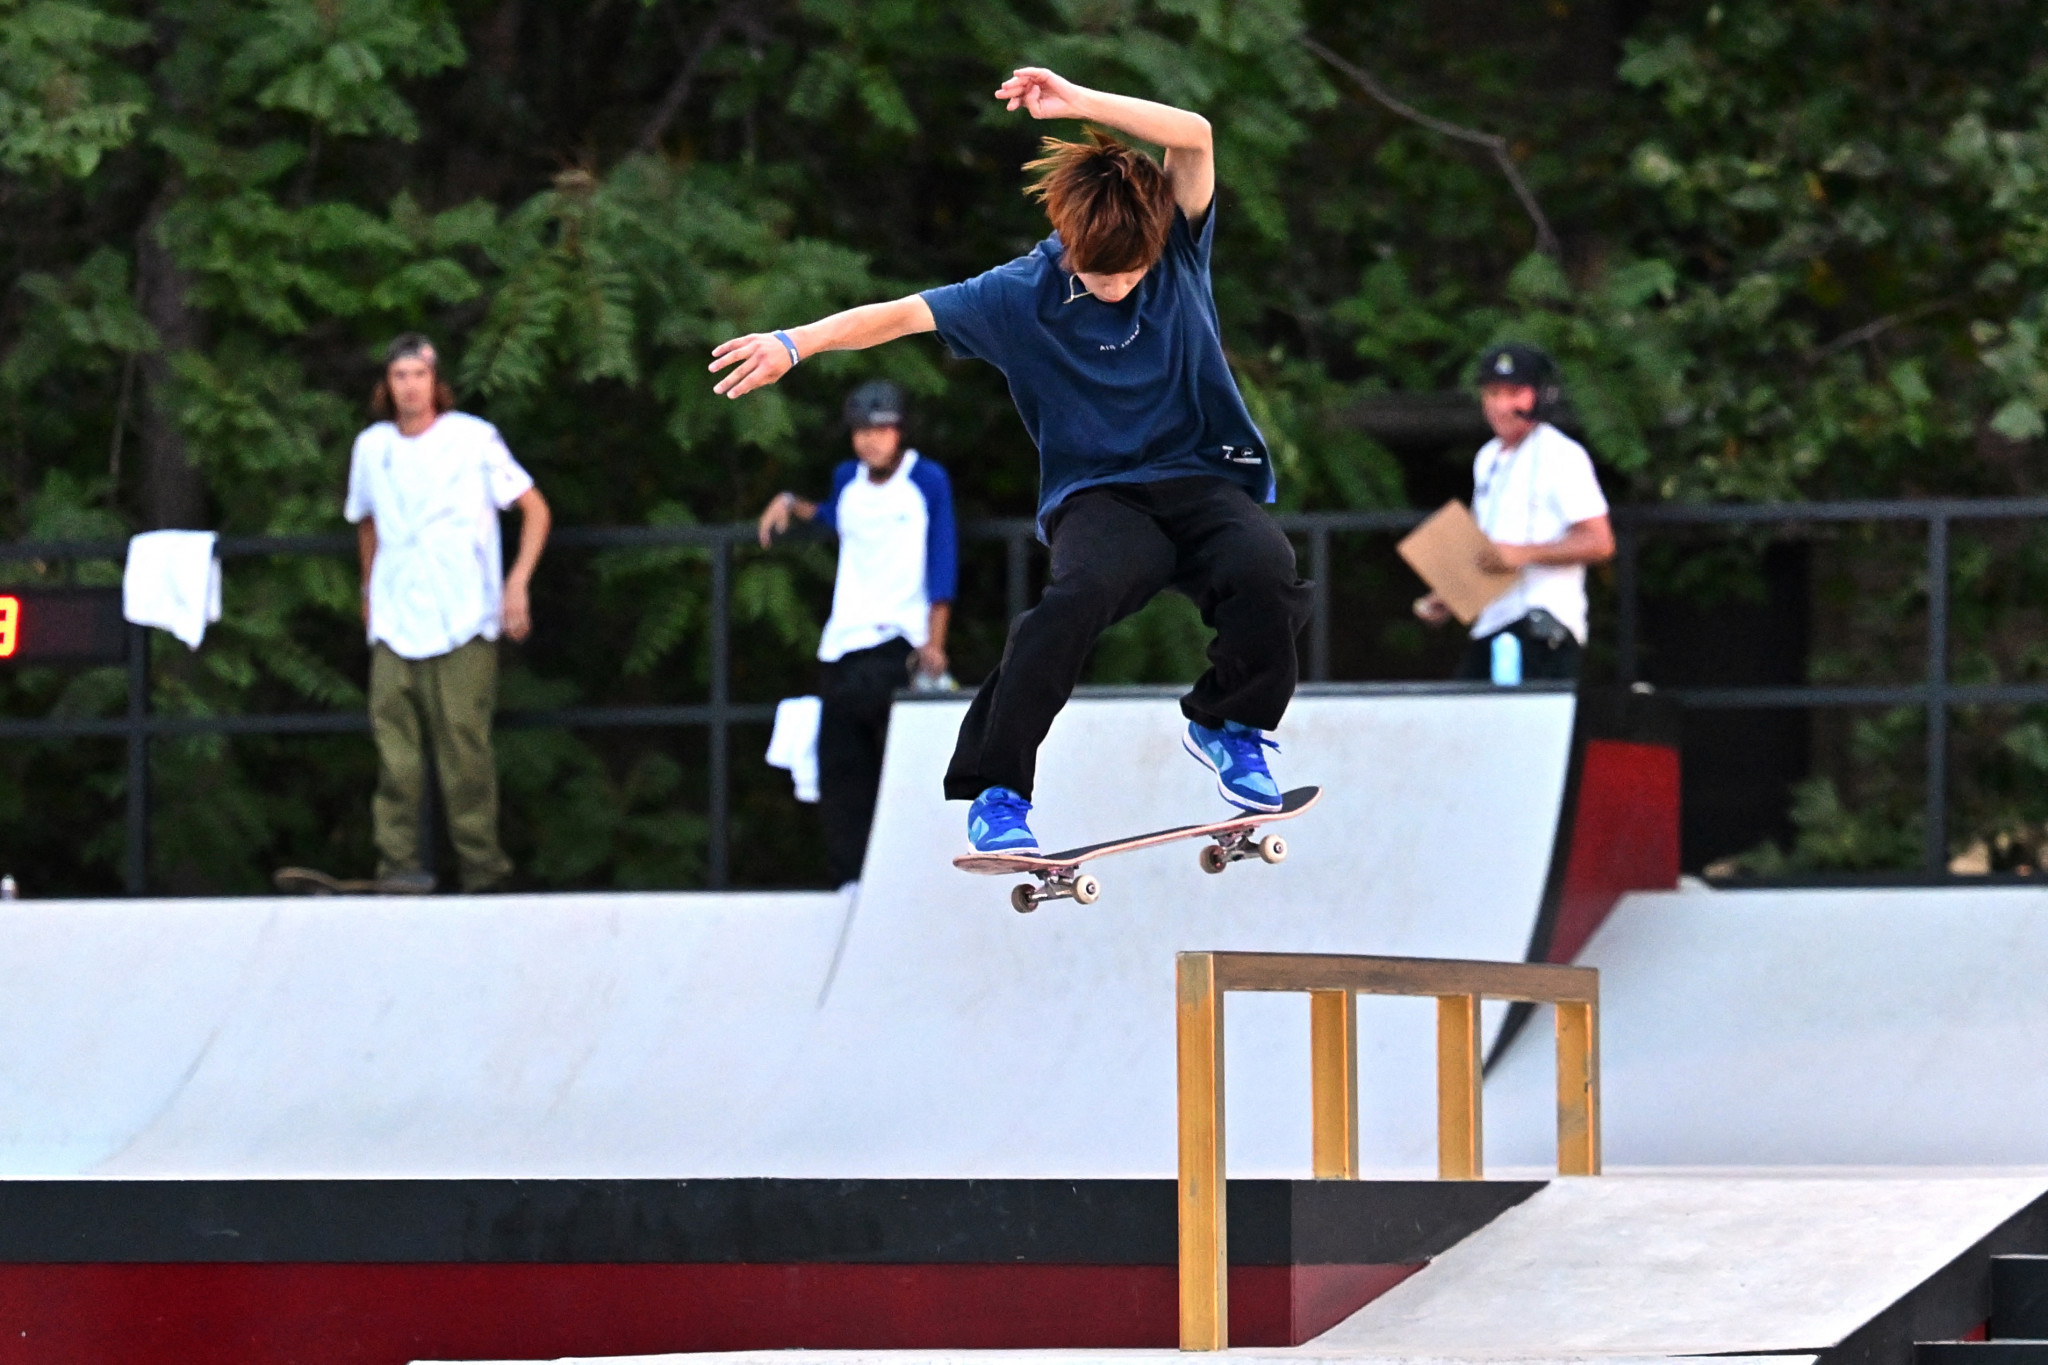 Horigome crashes out of Street and Park World Skateboarding Championships in Sharjah